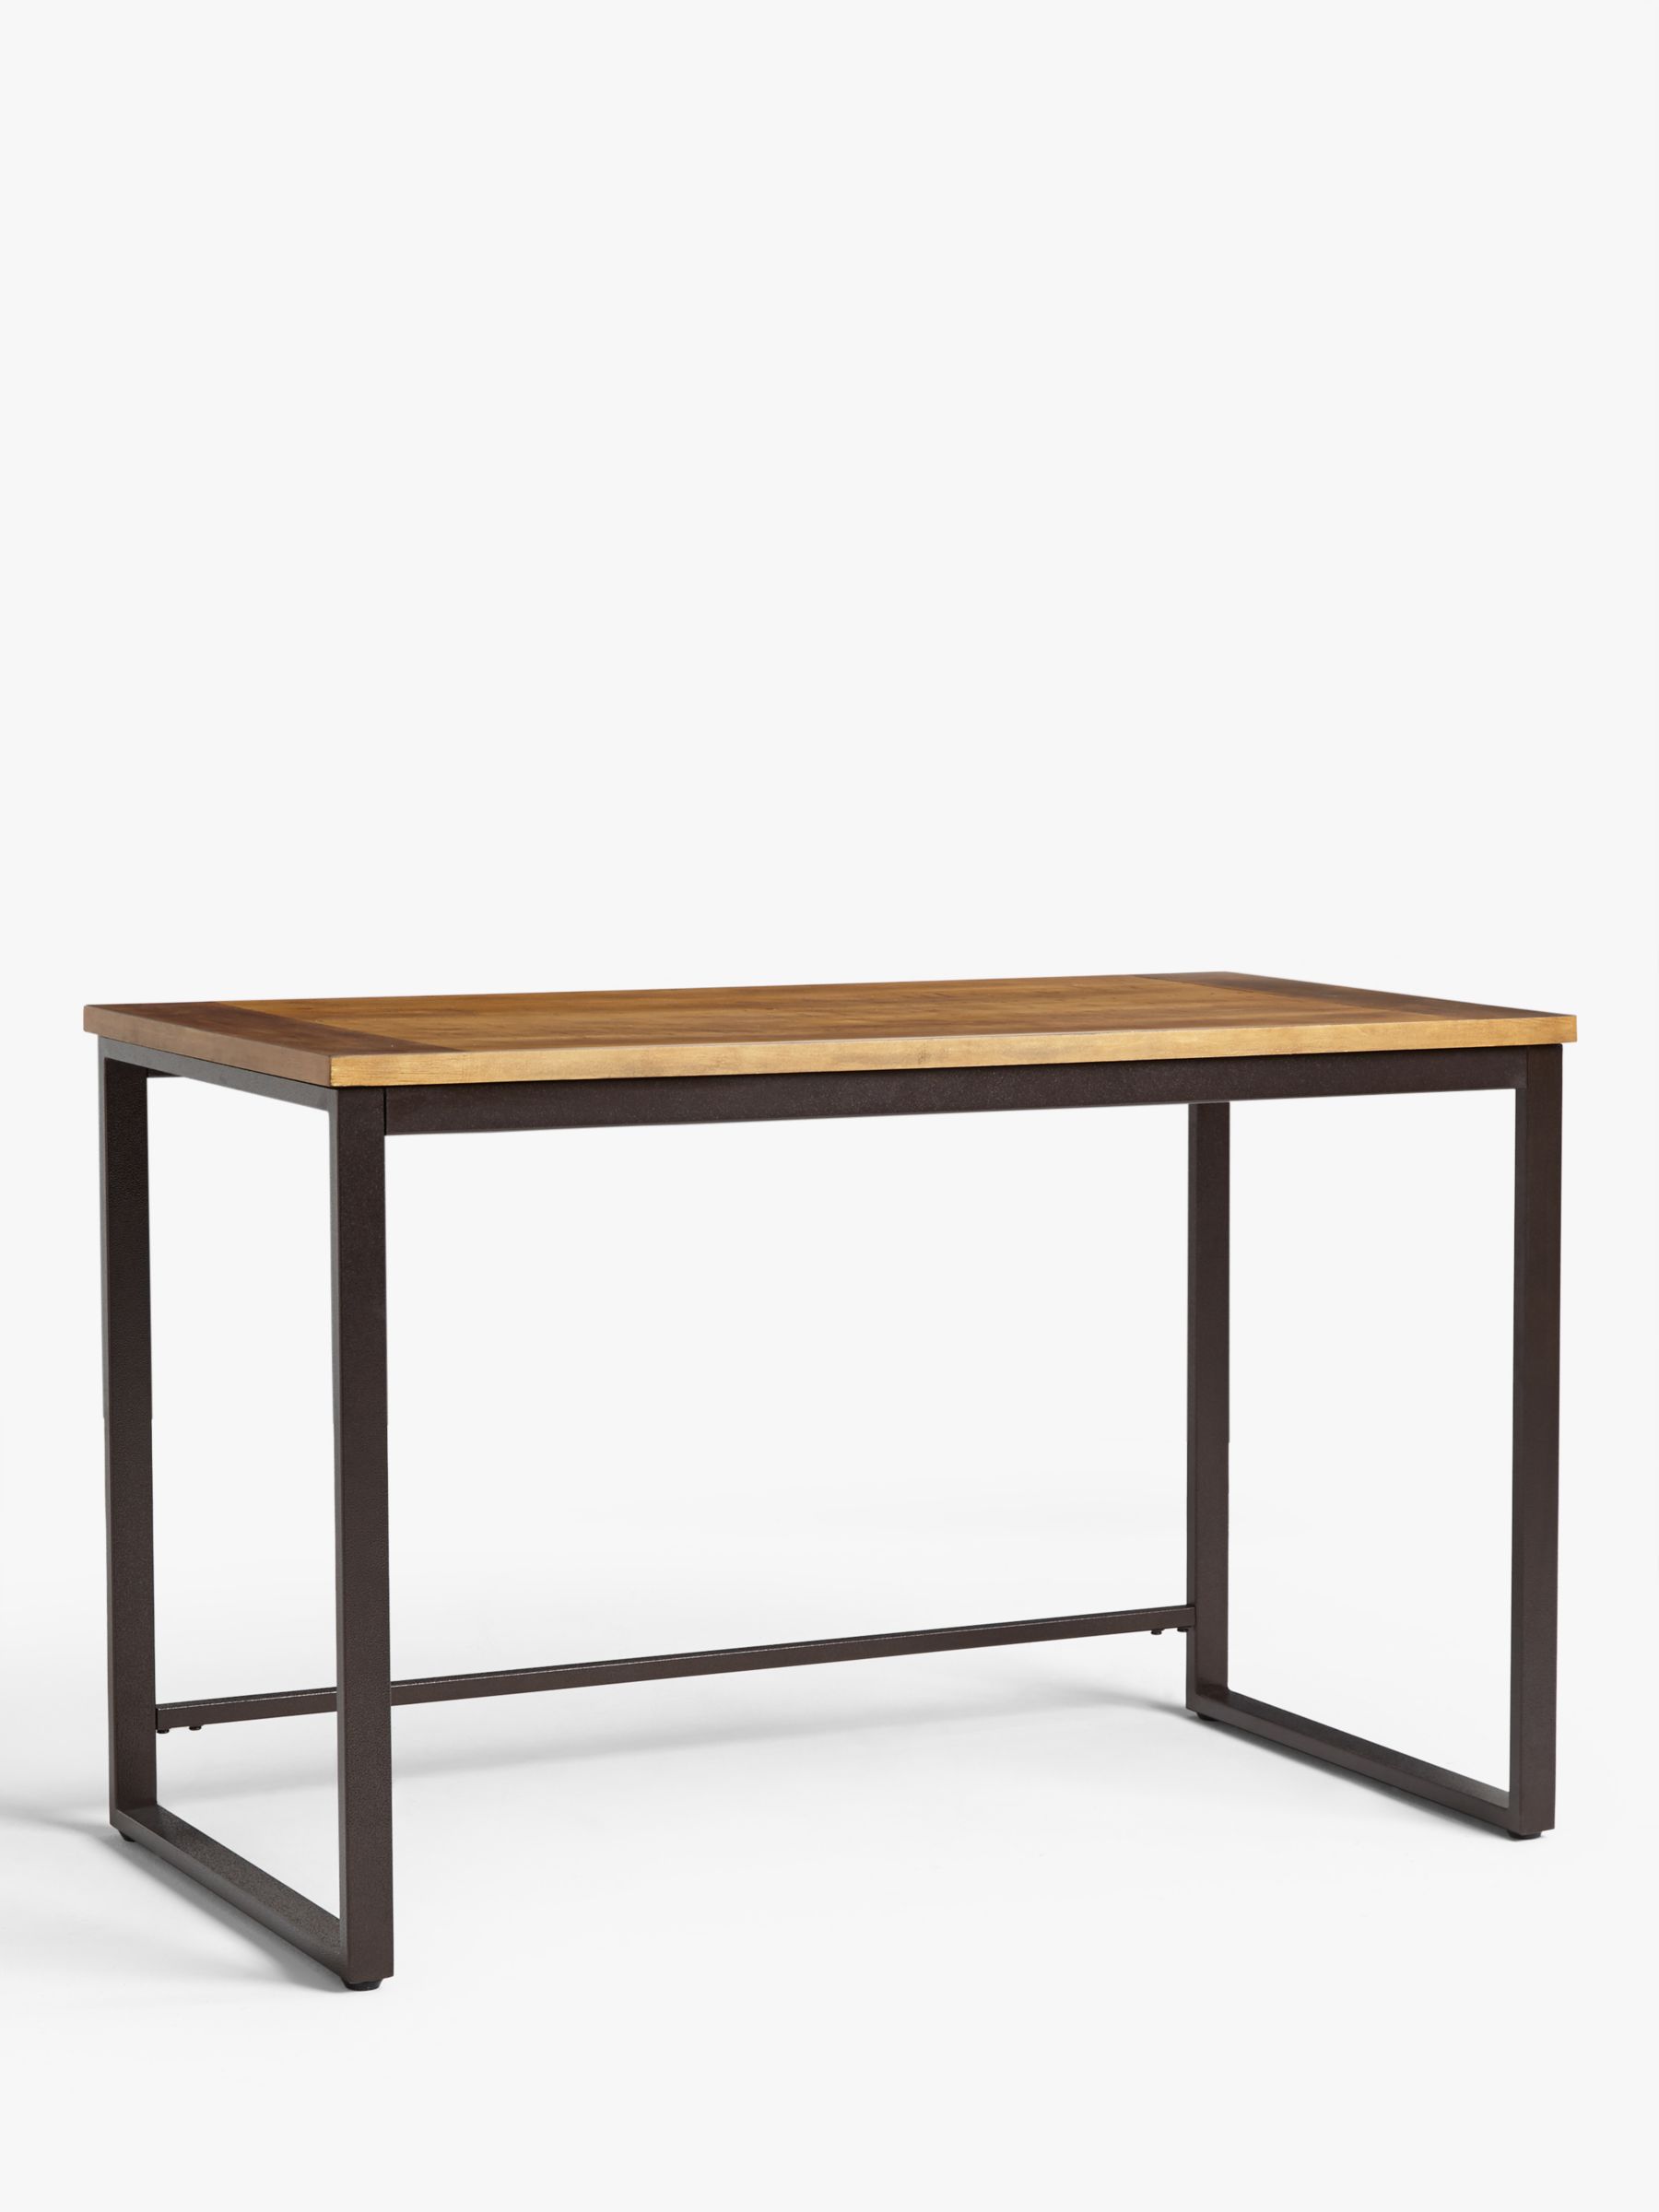 Photo of John lewis anyday fallowfield desk